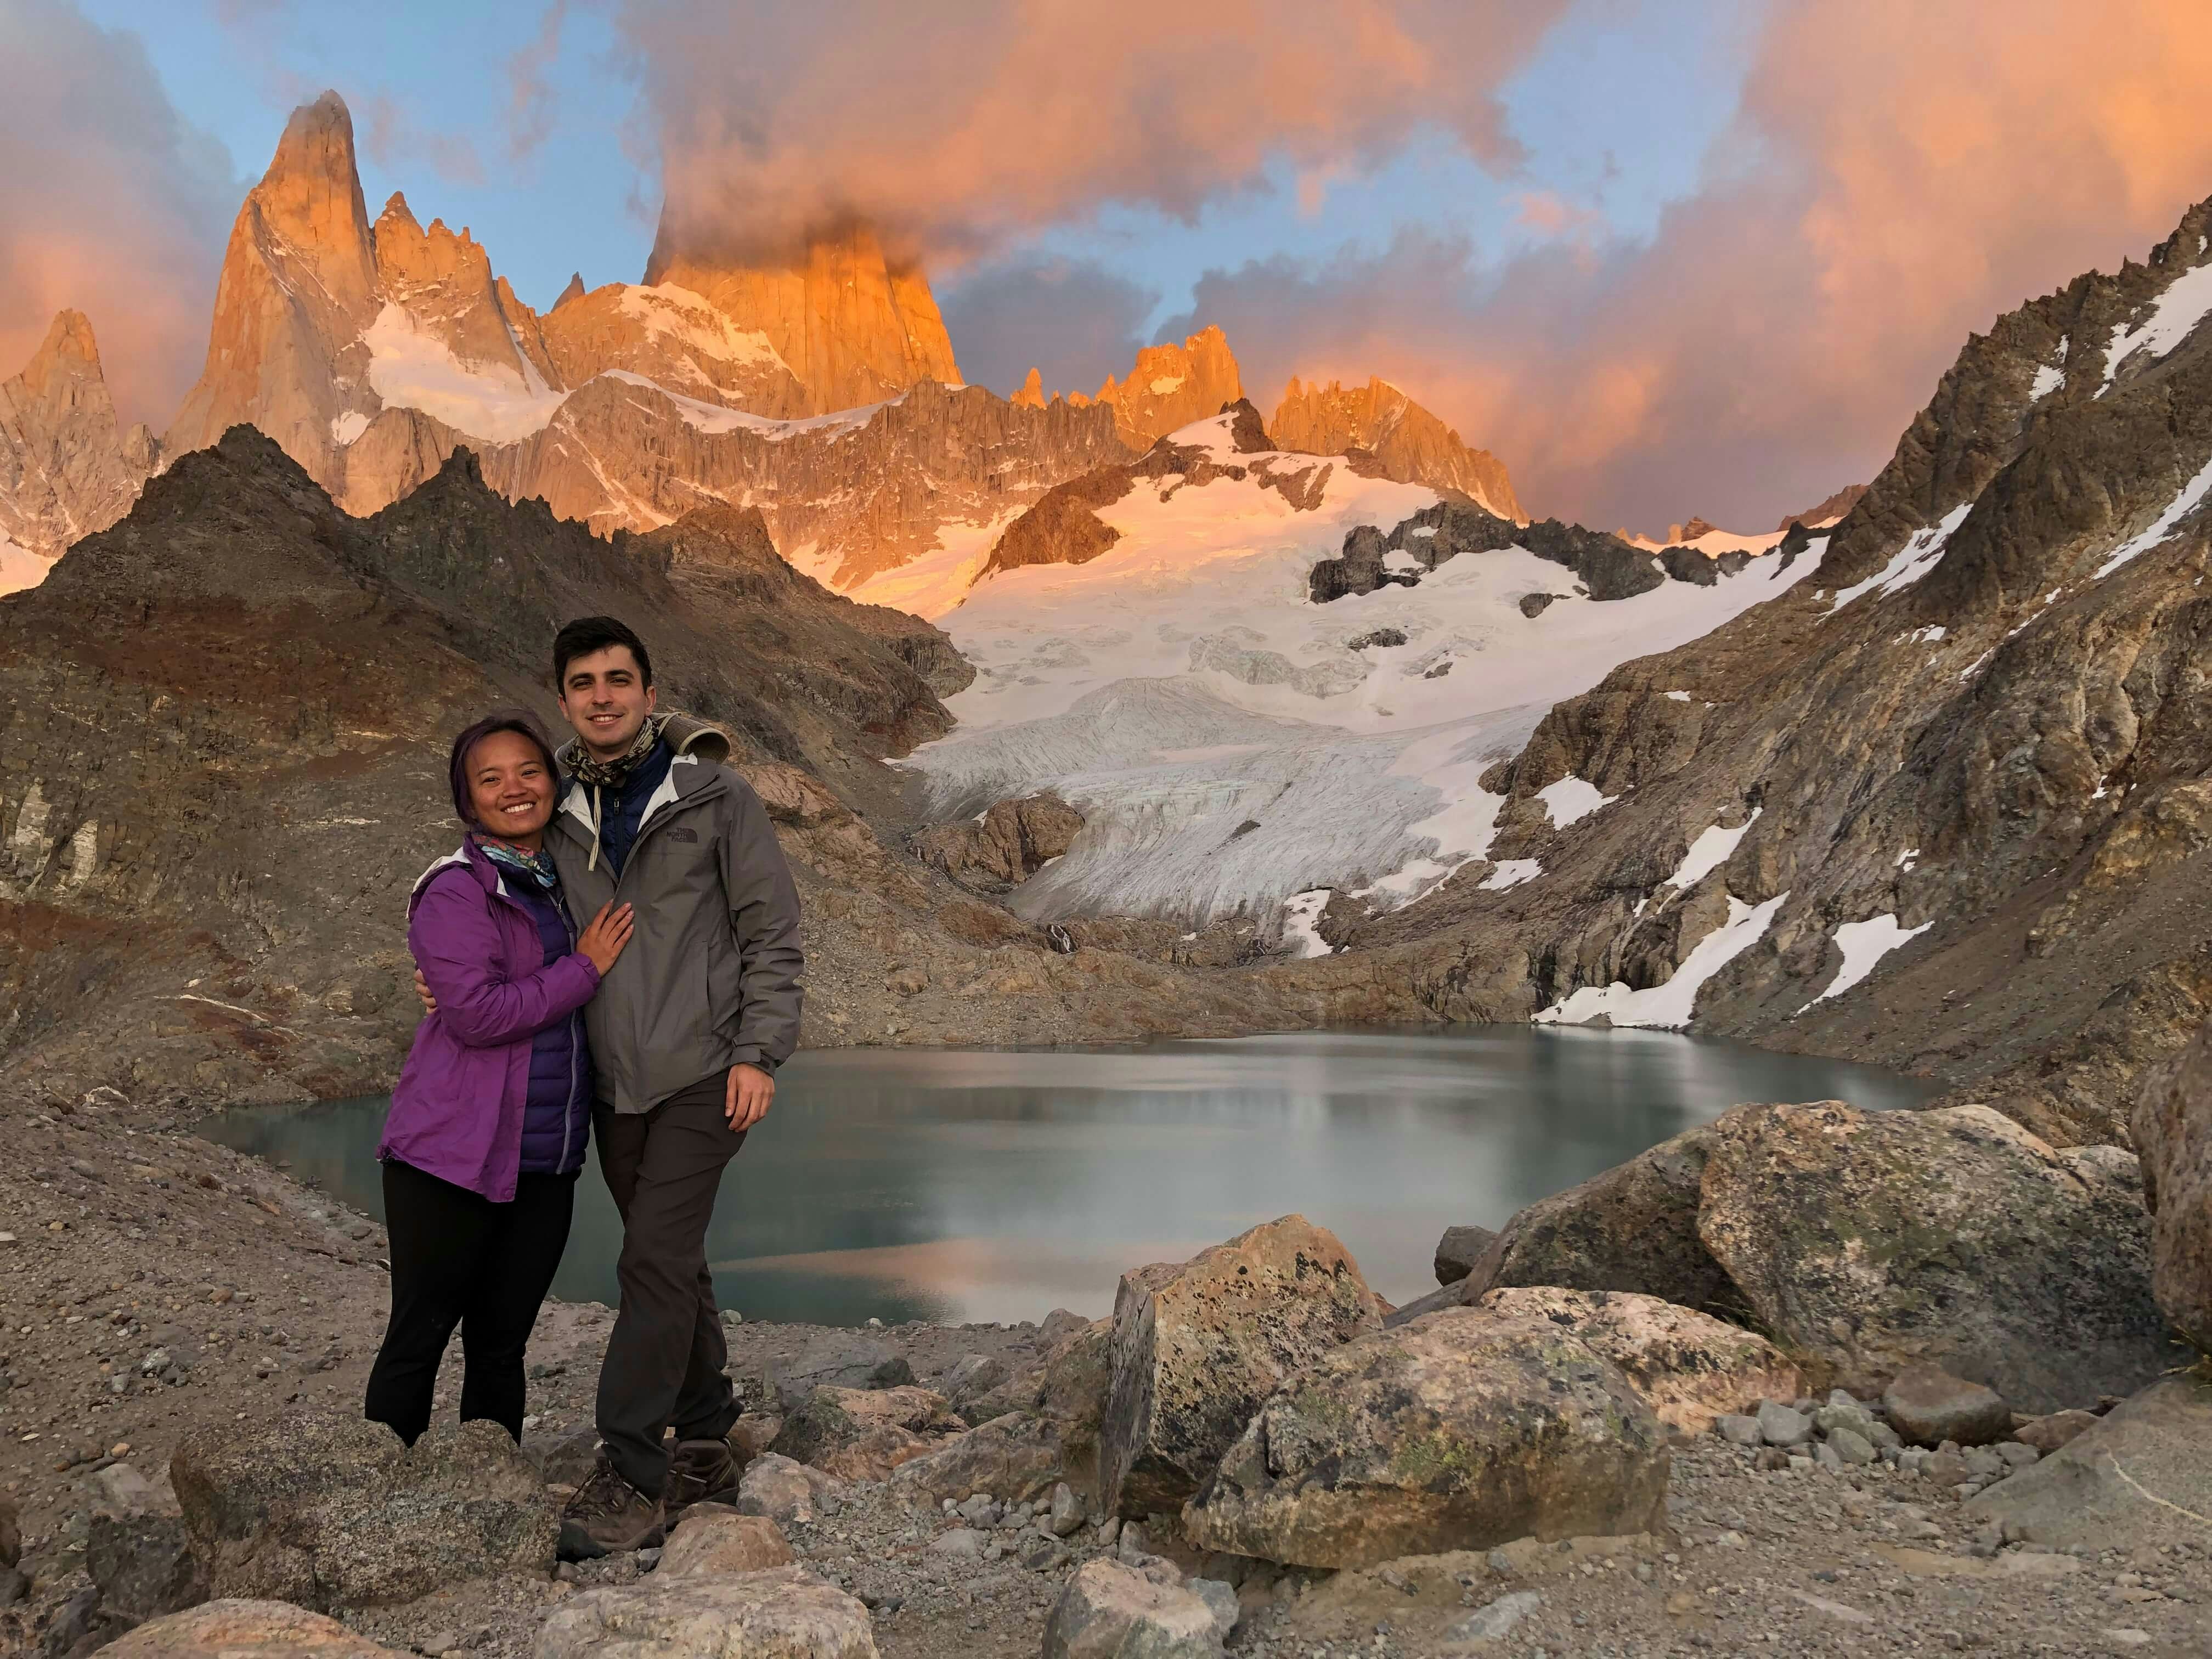 The young couple in hiking gear pose for a picture with a mountain and lake in the background at sunset.